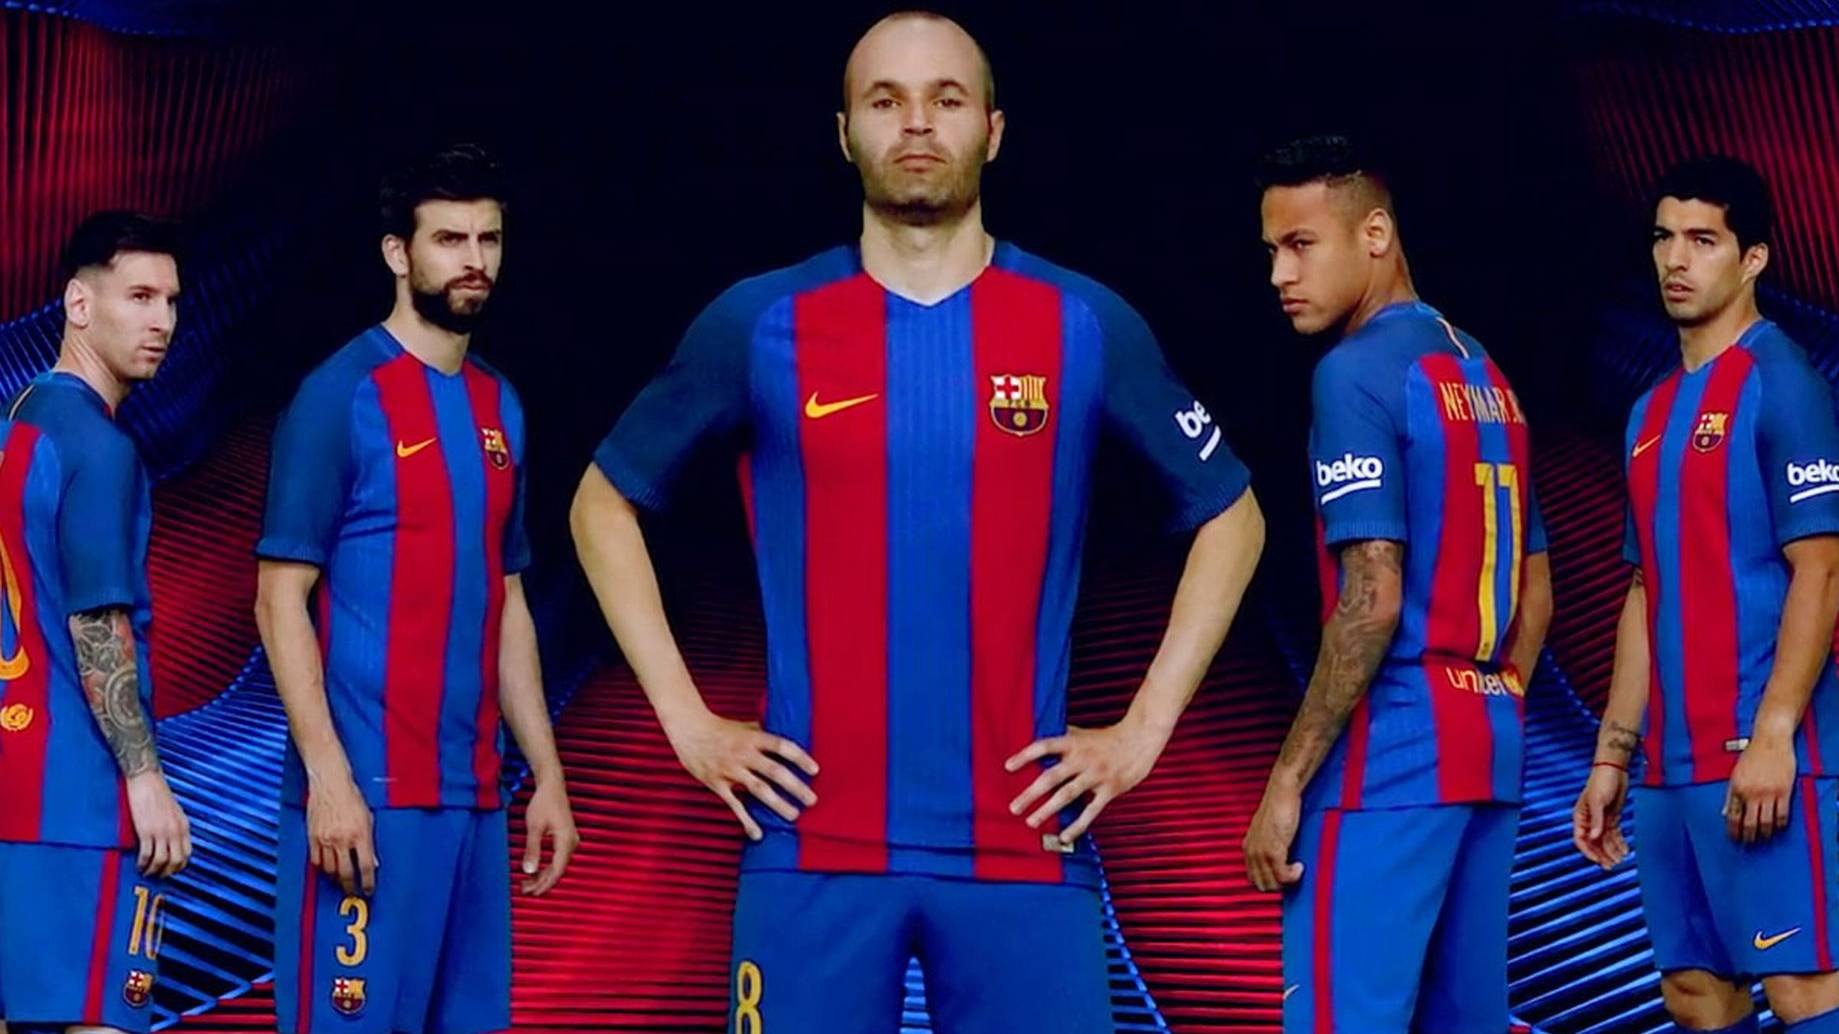 The new T-shirt of the FC Barcelona without advertising